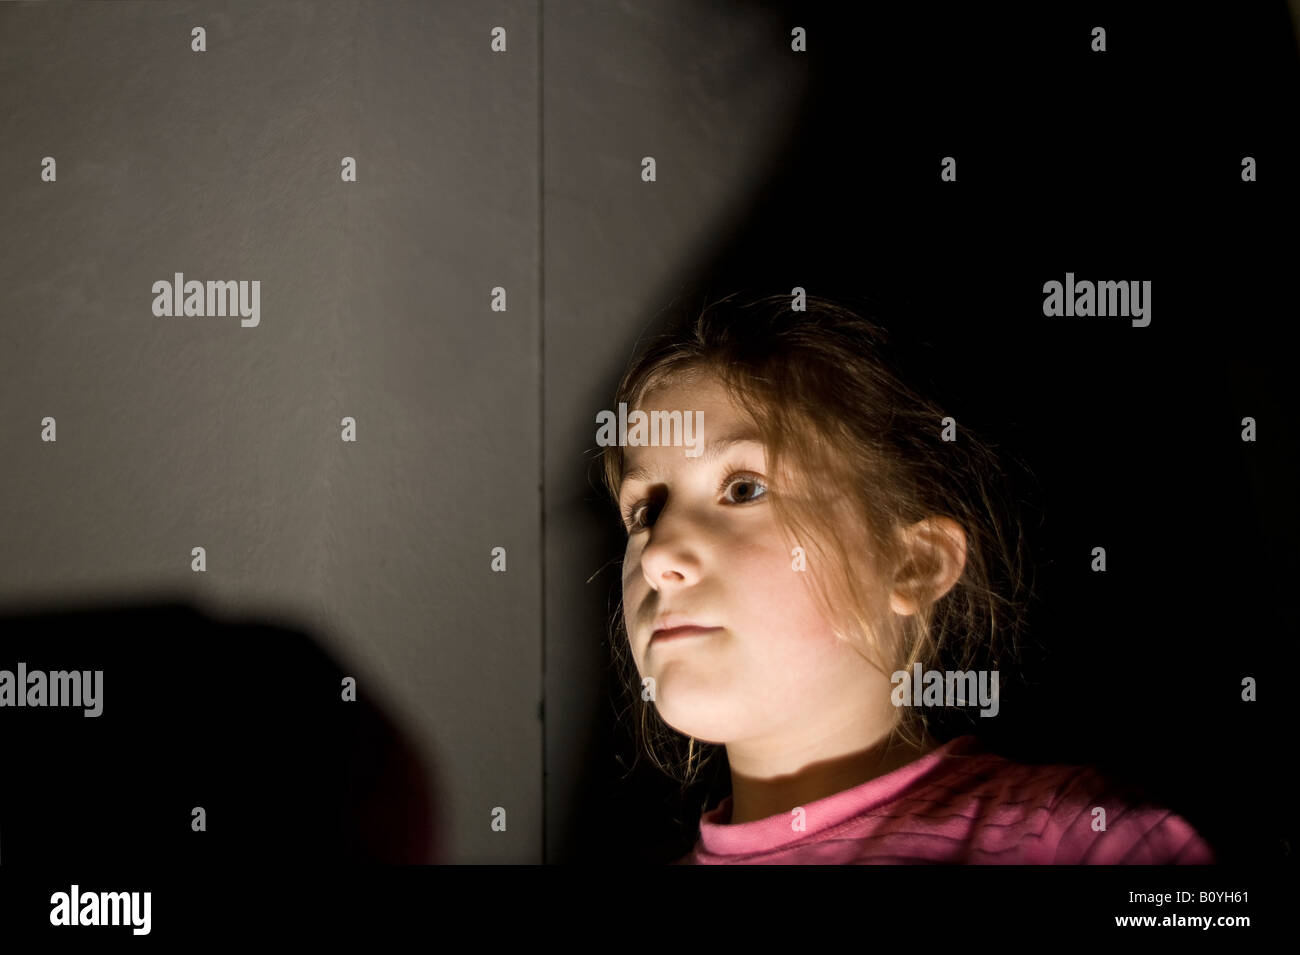 spooky picture of young girl in shadows Stock Photo